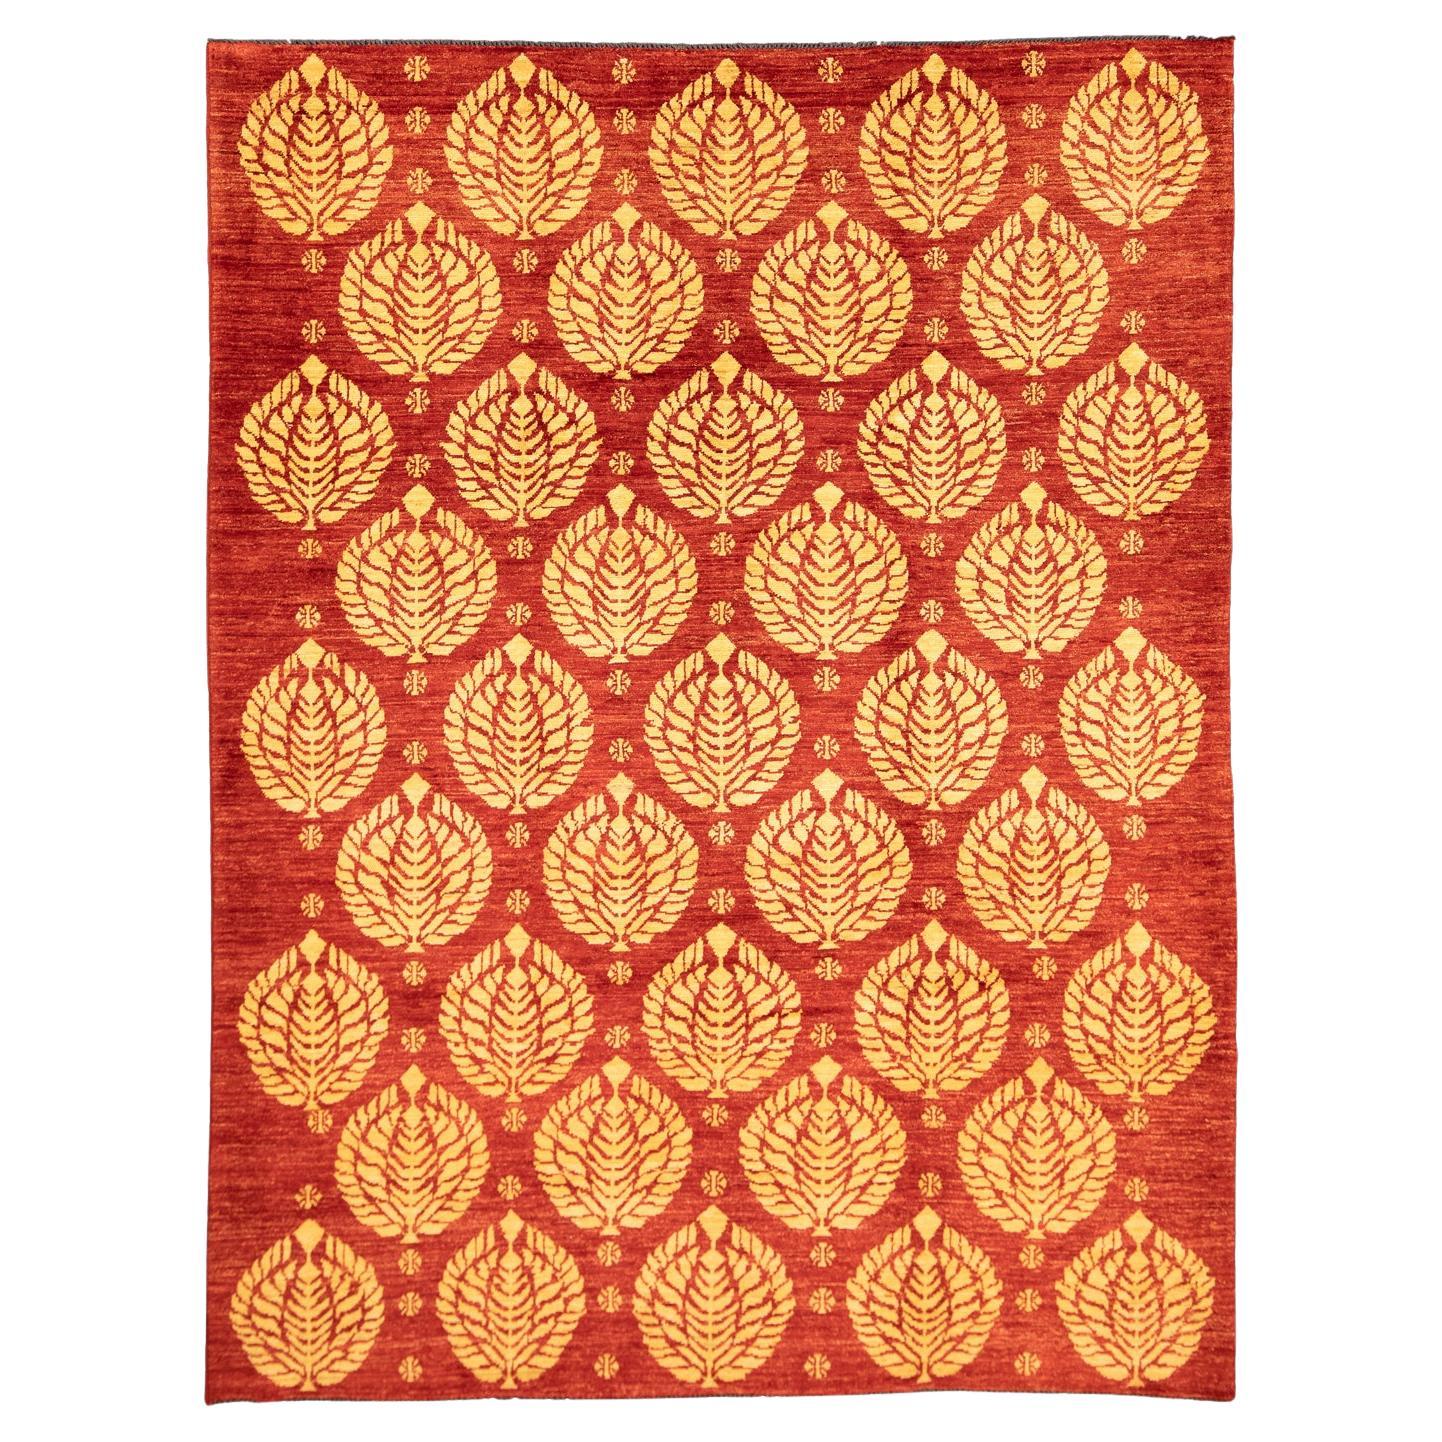 Bold Design Hand-Knotted Vintage Red Field Etno Yadan Rug, XXI Century